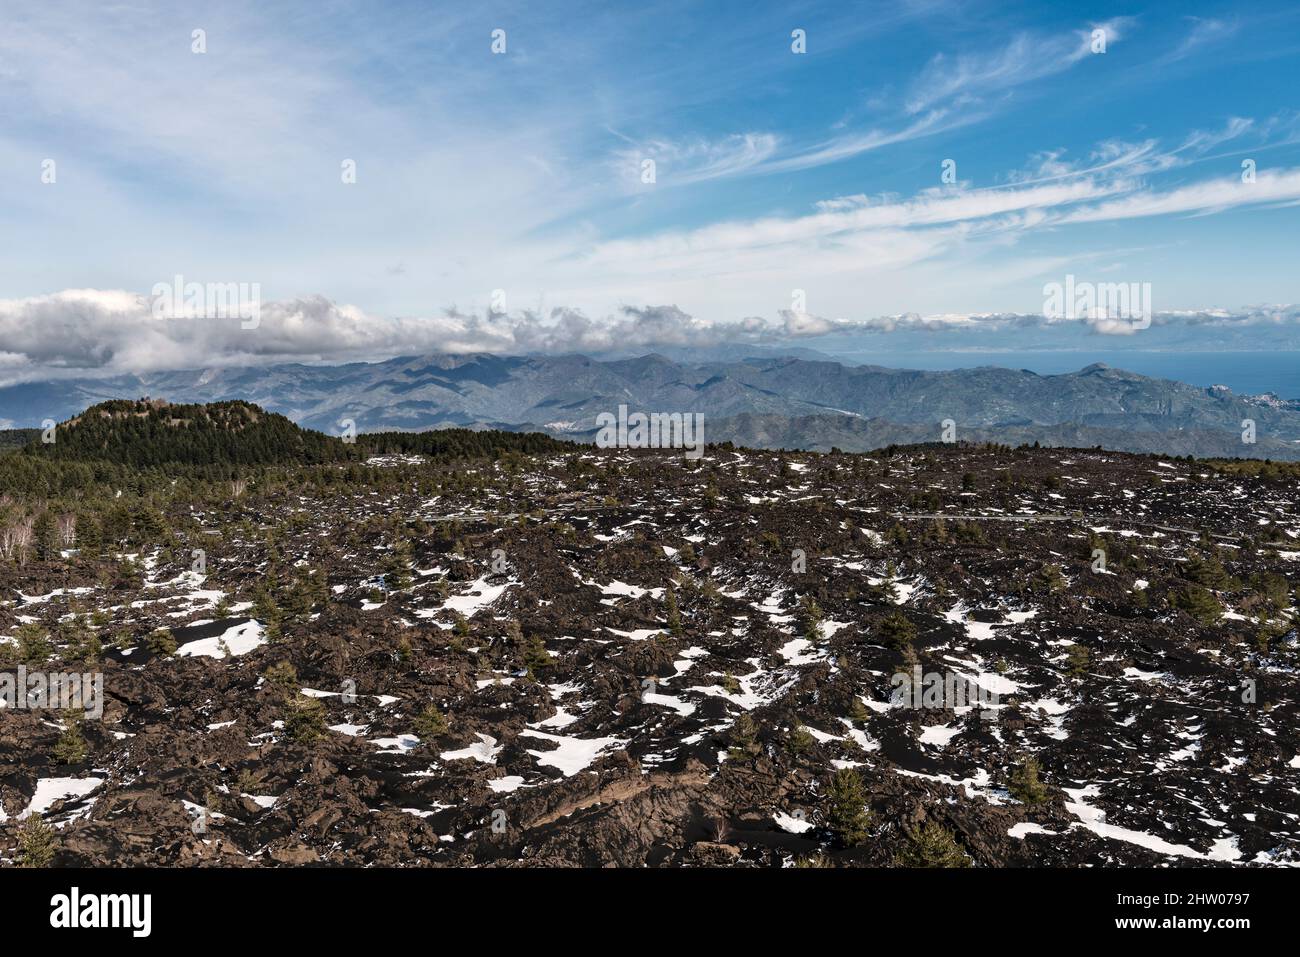 Looking over a lava field from the Monti Sartorius, a series of craters on the side of Mount Etna, Sicily. The Nebrodi Mountains lie in the distance Stock Photo